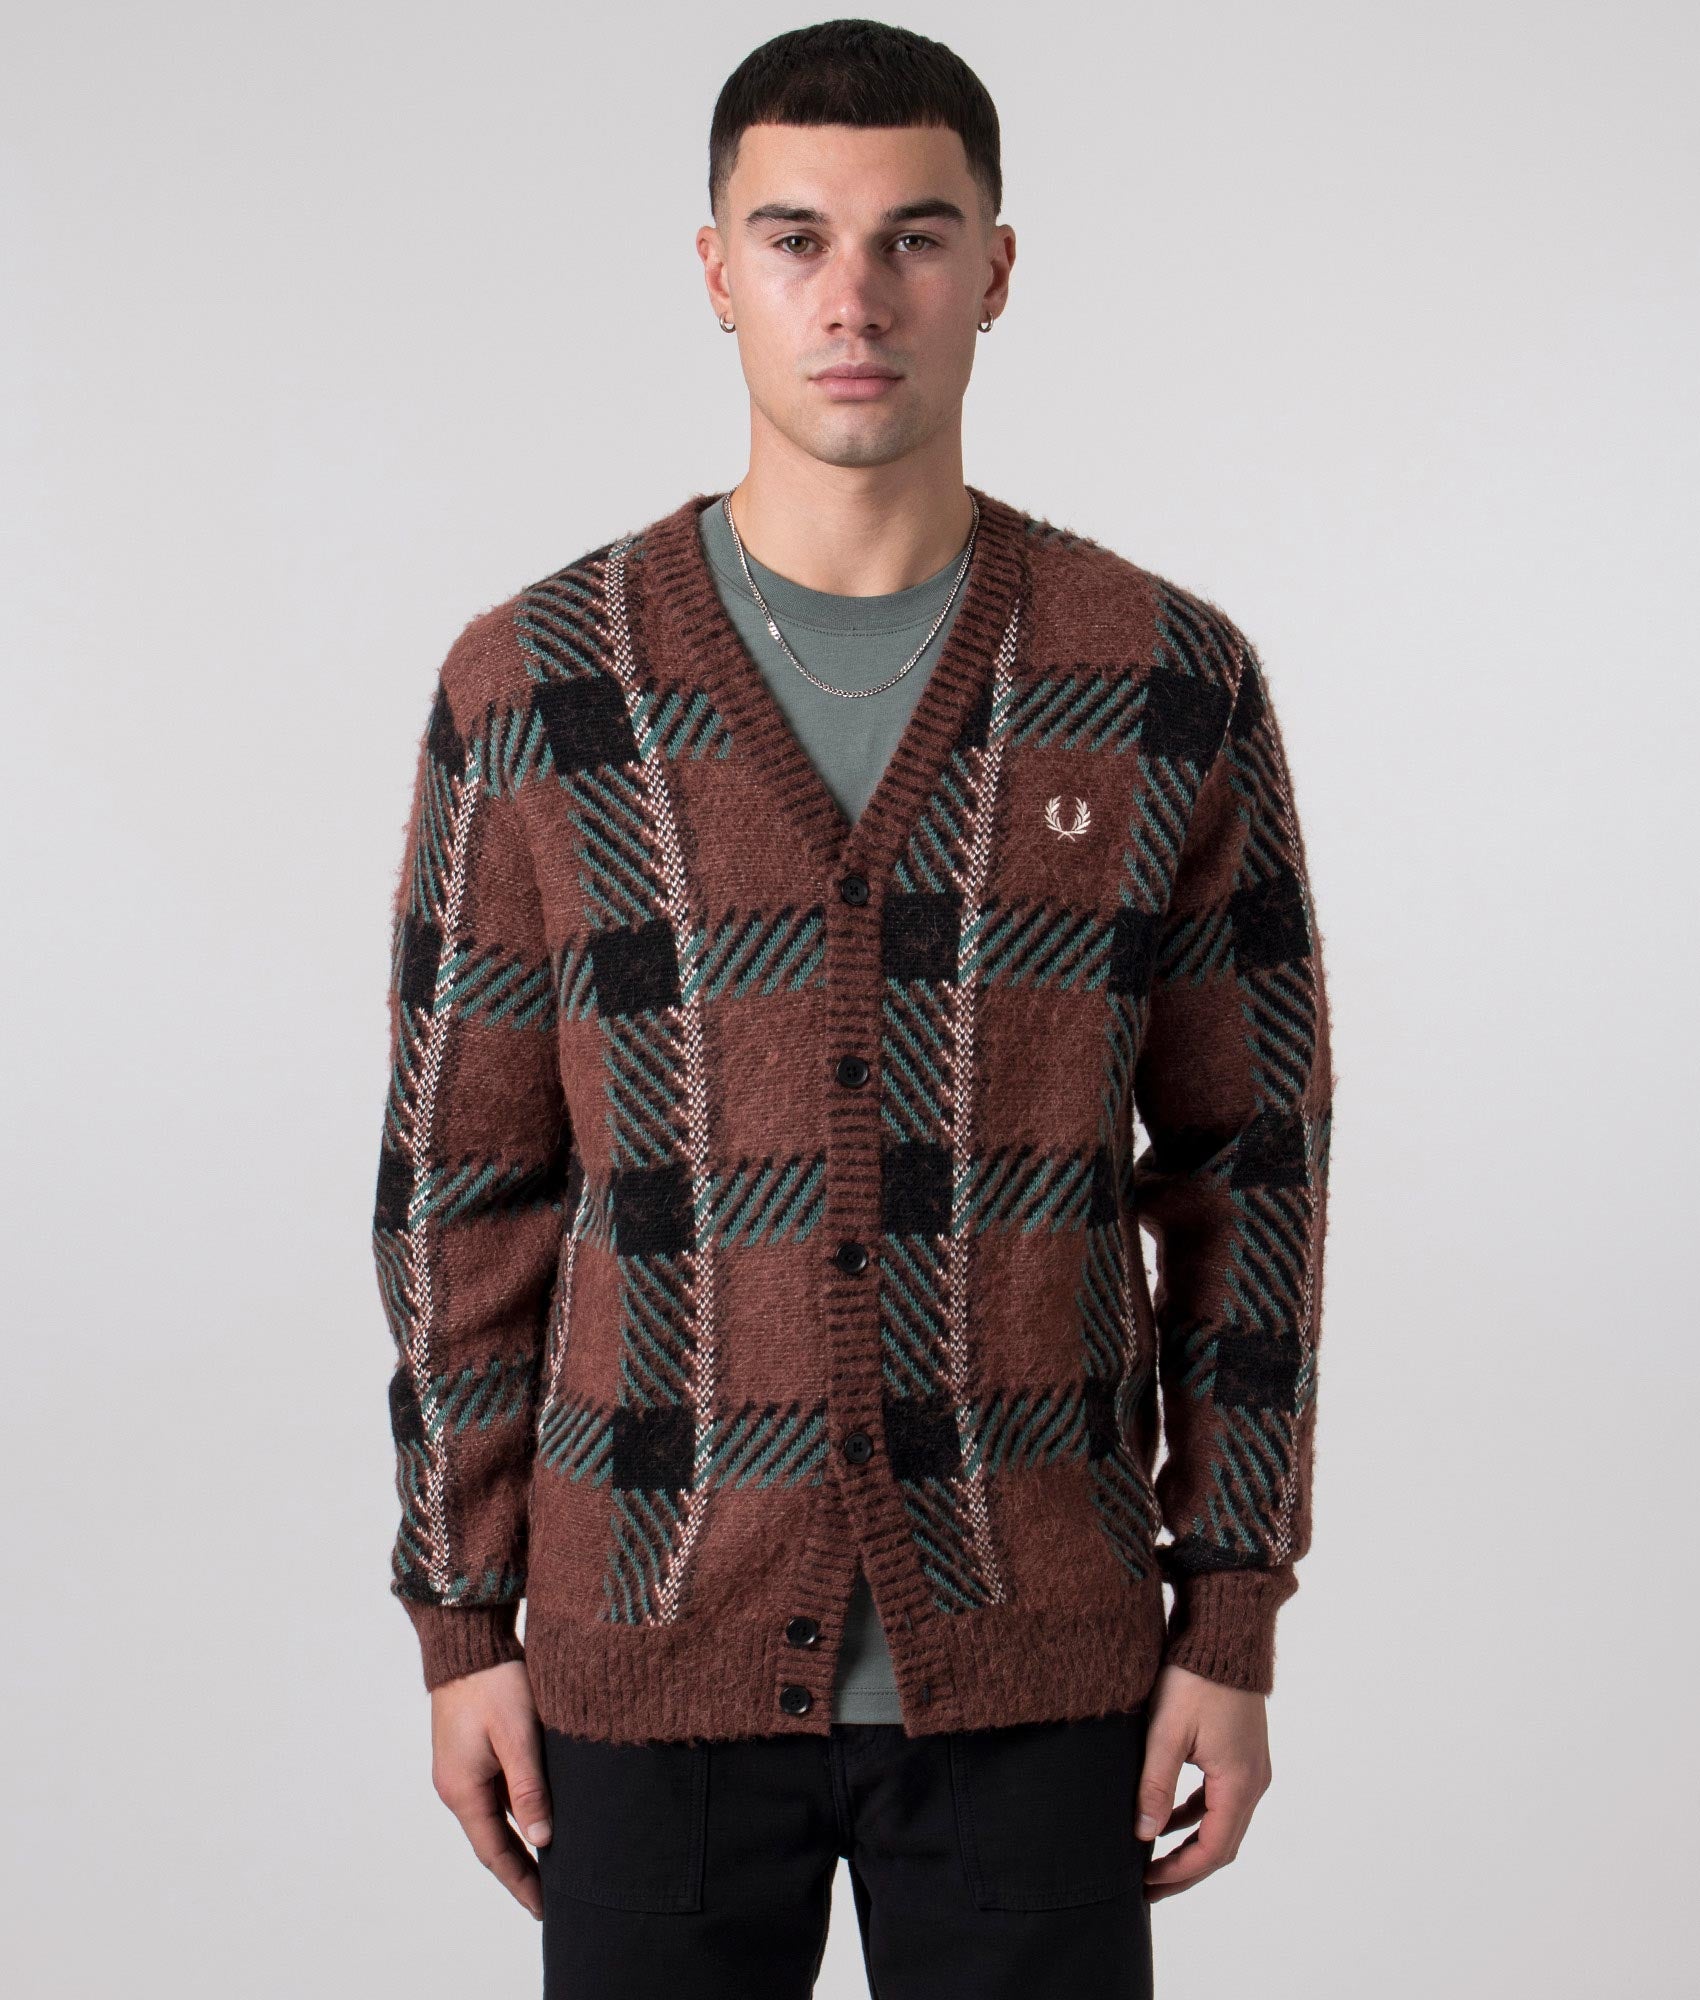 Fred Perry Mens Glitch Tartan Cardigan - Colour: S54 Whisky Brown - Size: Large